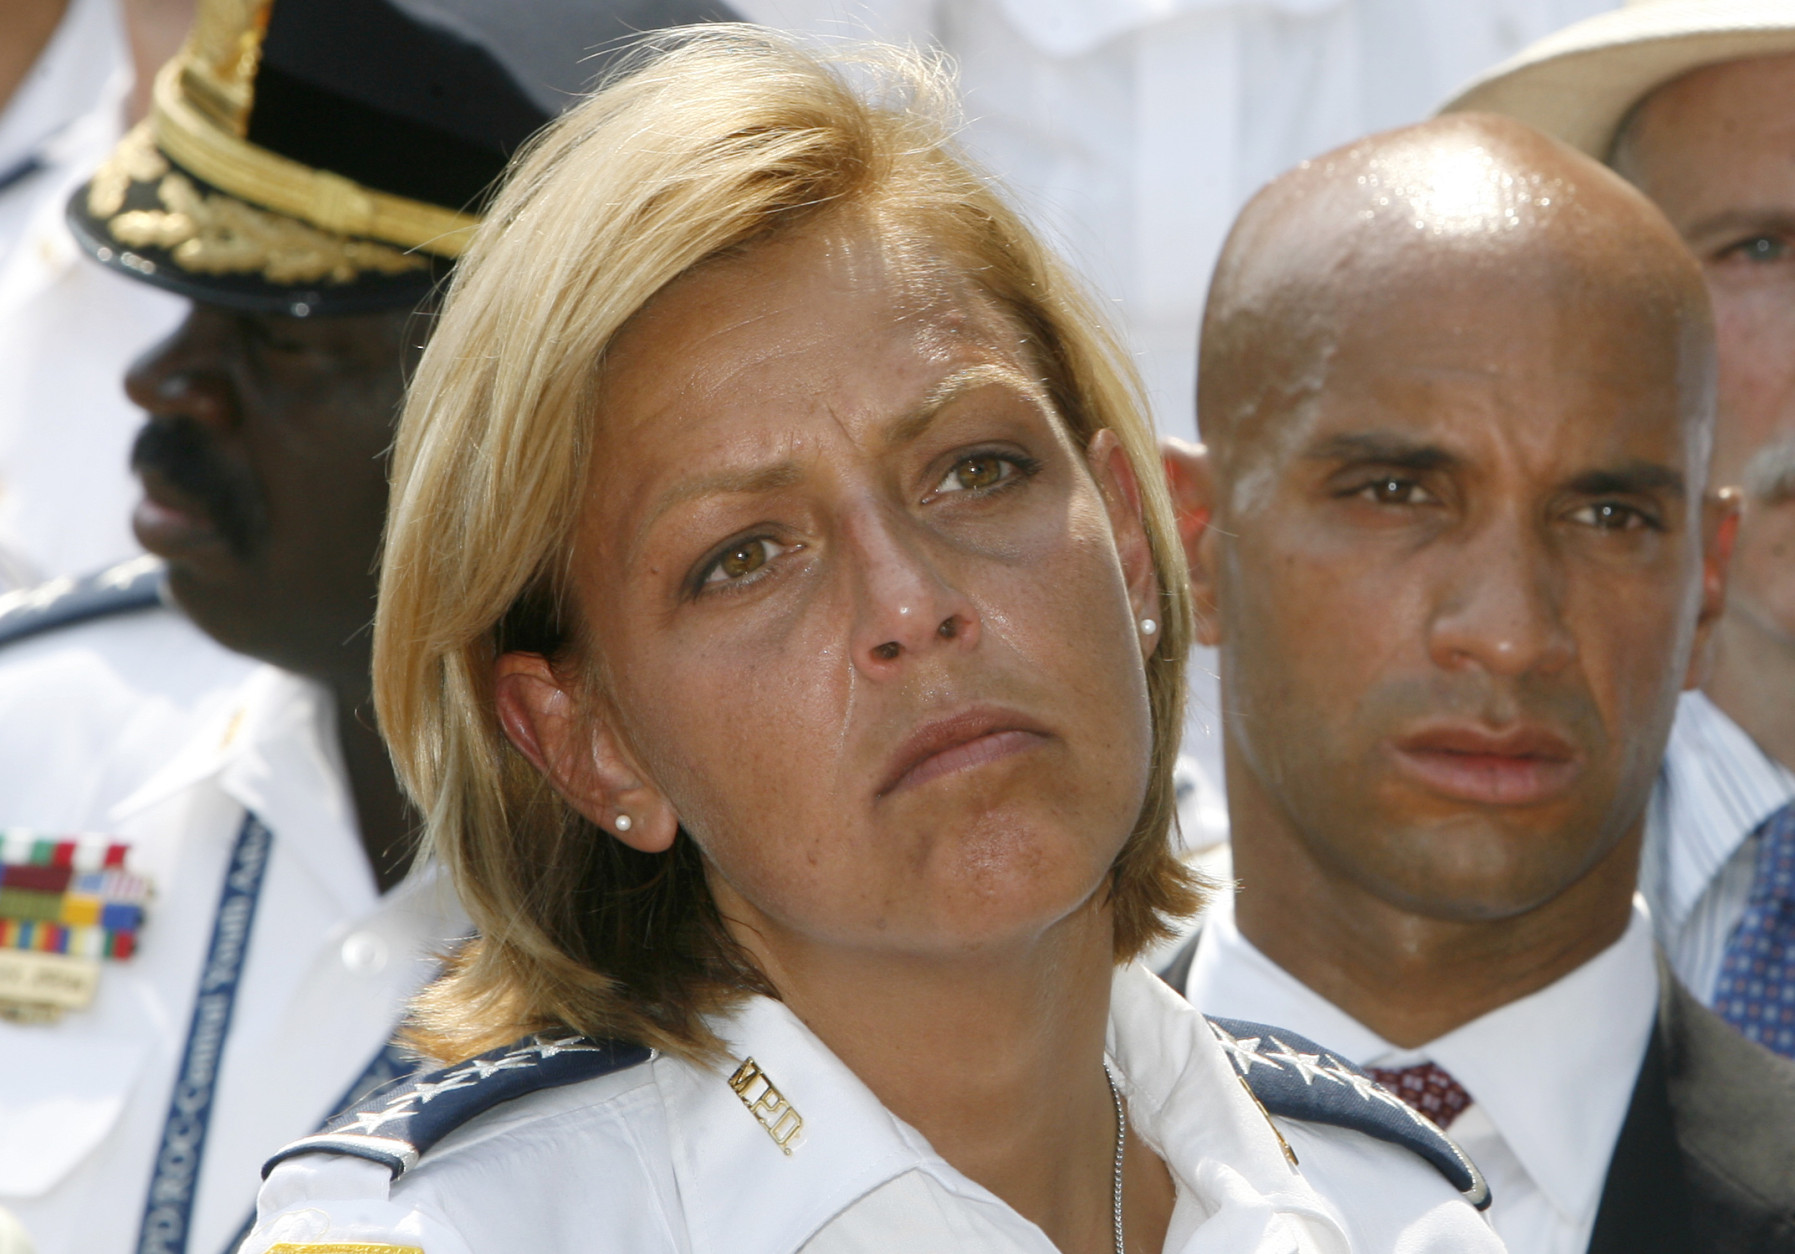 District of Columbia Chief of Police Cathy Lanier, left, and Mayor Adrian Fenty announce that the city will ask the U.S. Supreme Court to reverse a  federal appeals court panel ruling overturning a 30-year law banning handguns in private homes, at a news conference in Washington on Monday, July 16, 2007. (AP Photo/Jacquelyn Martin)